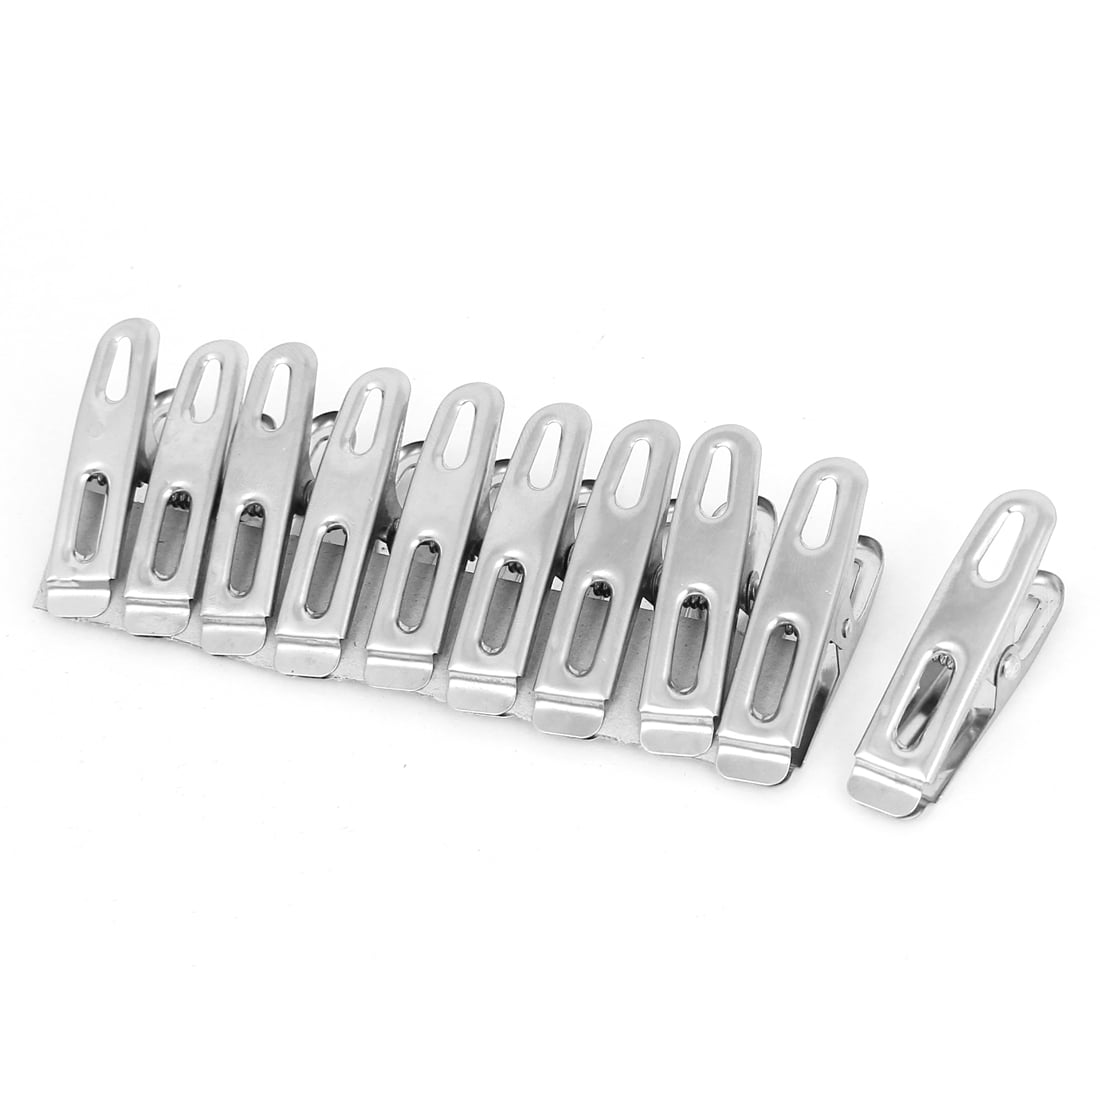 6/20 Clips Clothes Drying Rack Metal Clothespins Hanger Clip Set Herb Hanging